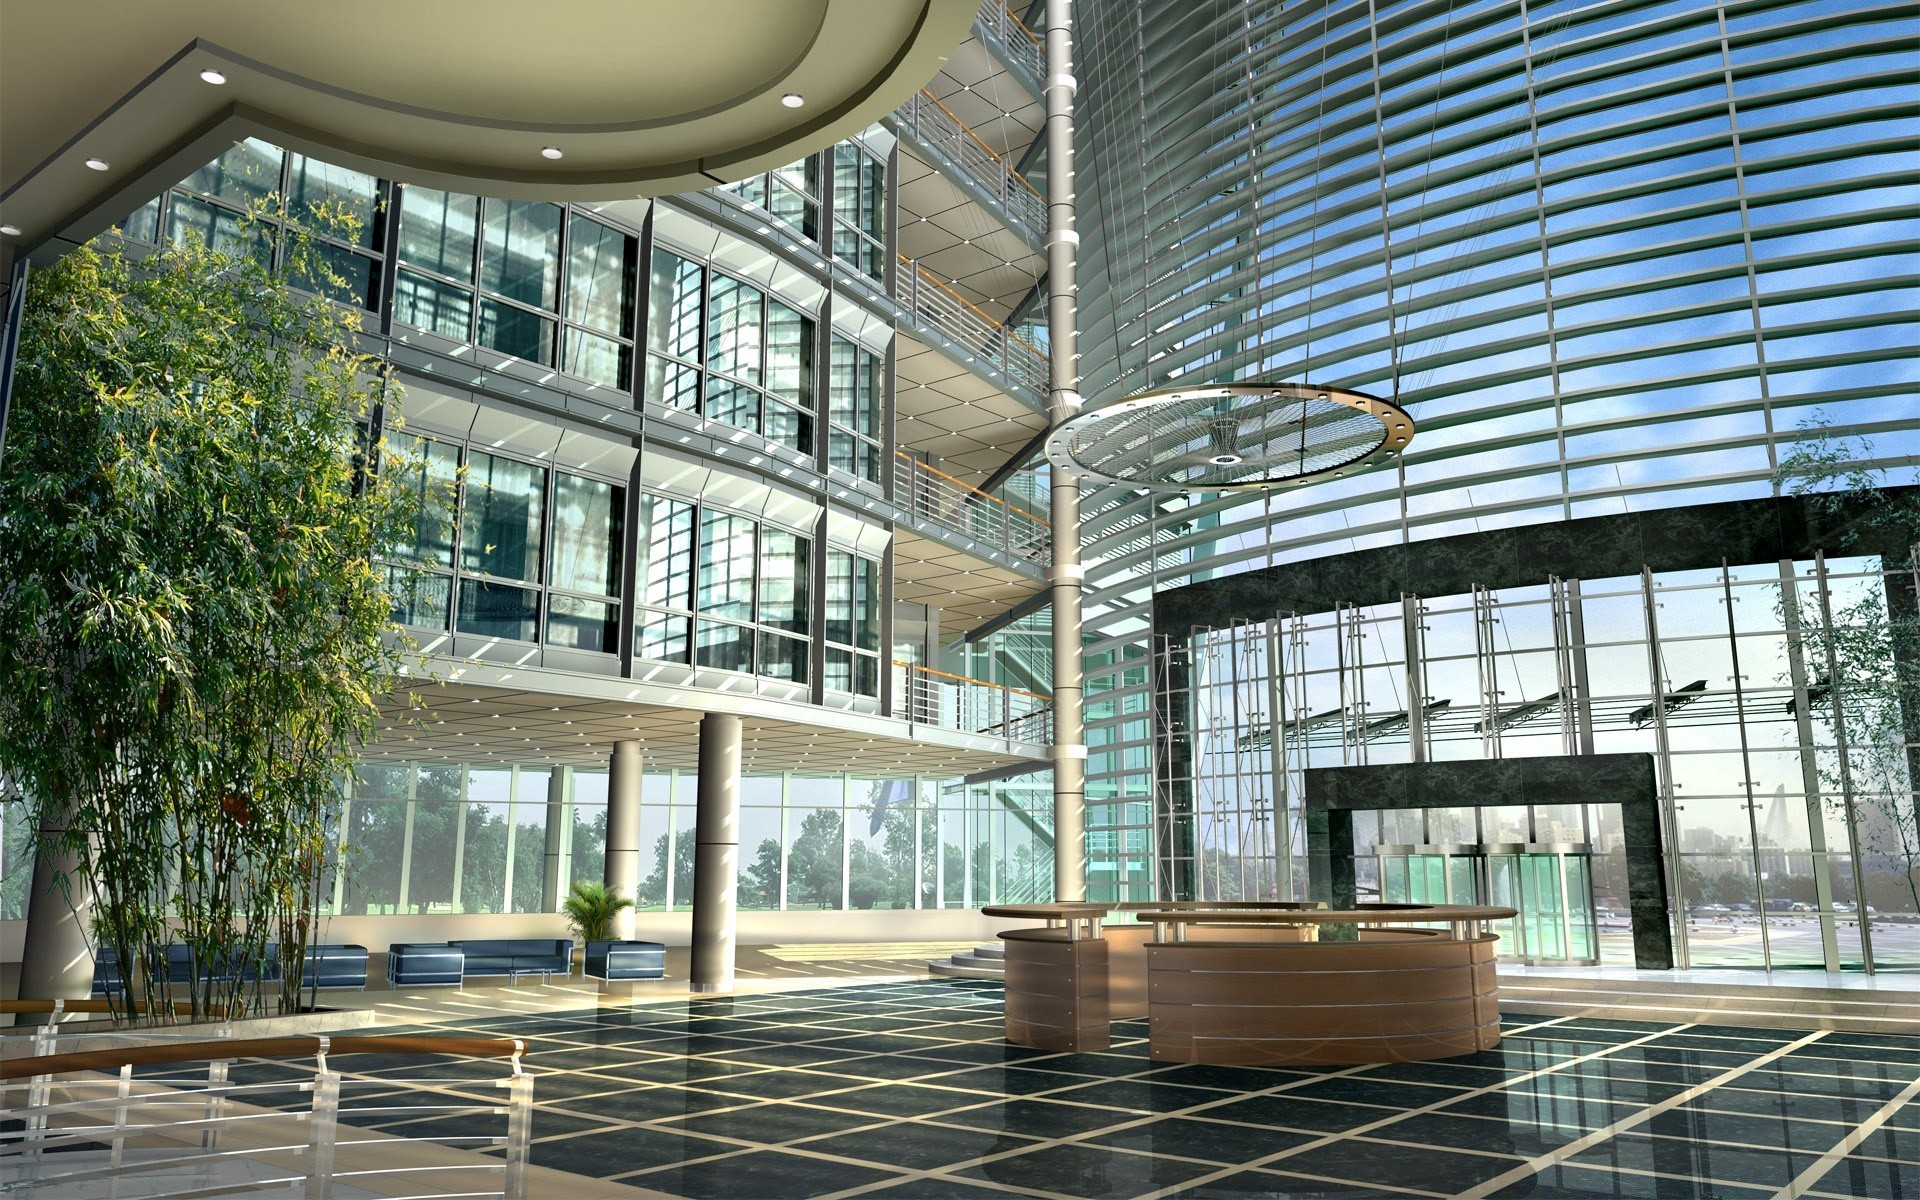 house and comfort architecture glass window modern contemporary office urban building business construction ceiling city indoors reflection futuristic apartment expression estate lobby